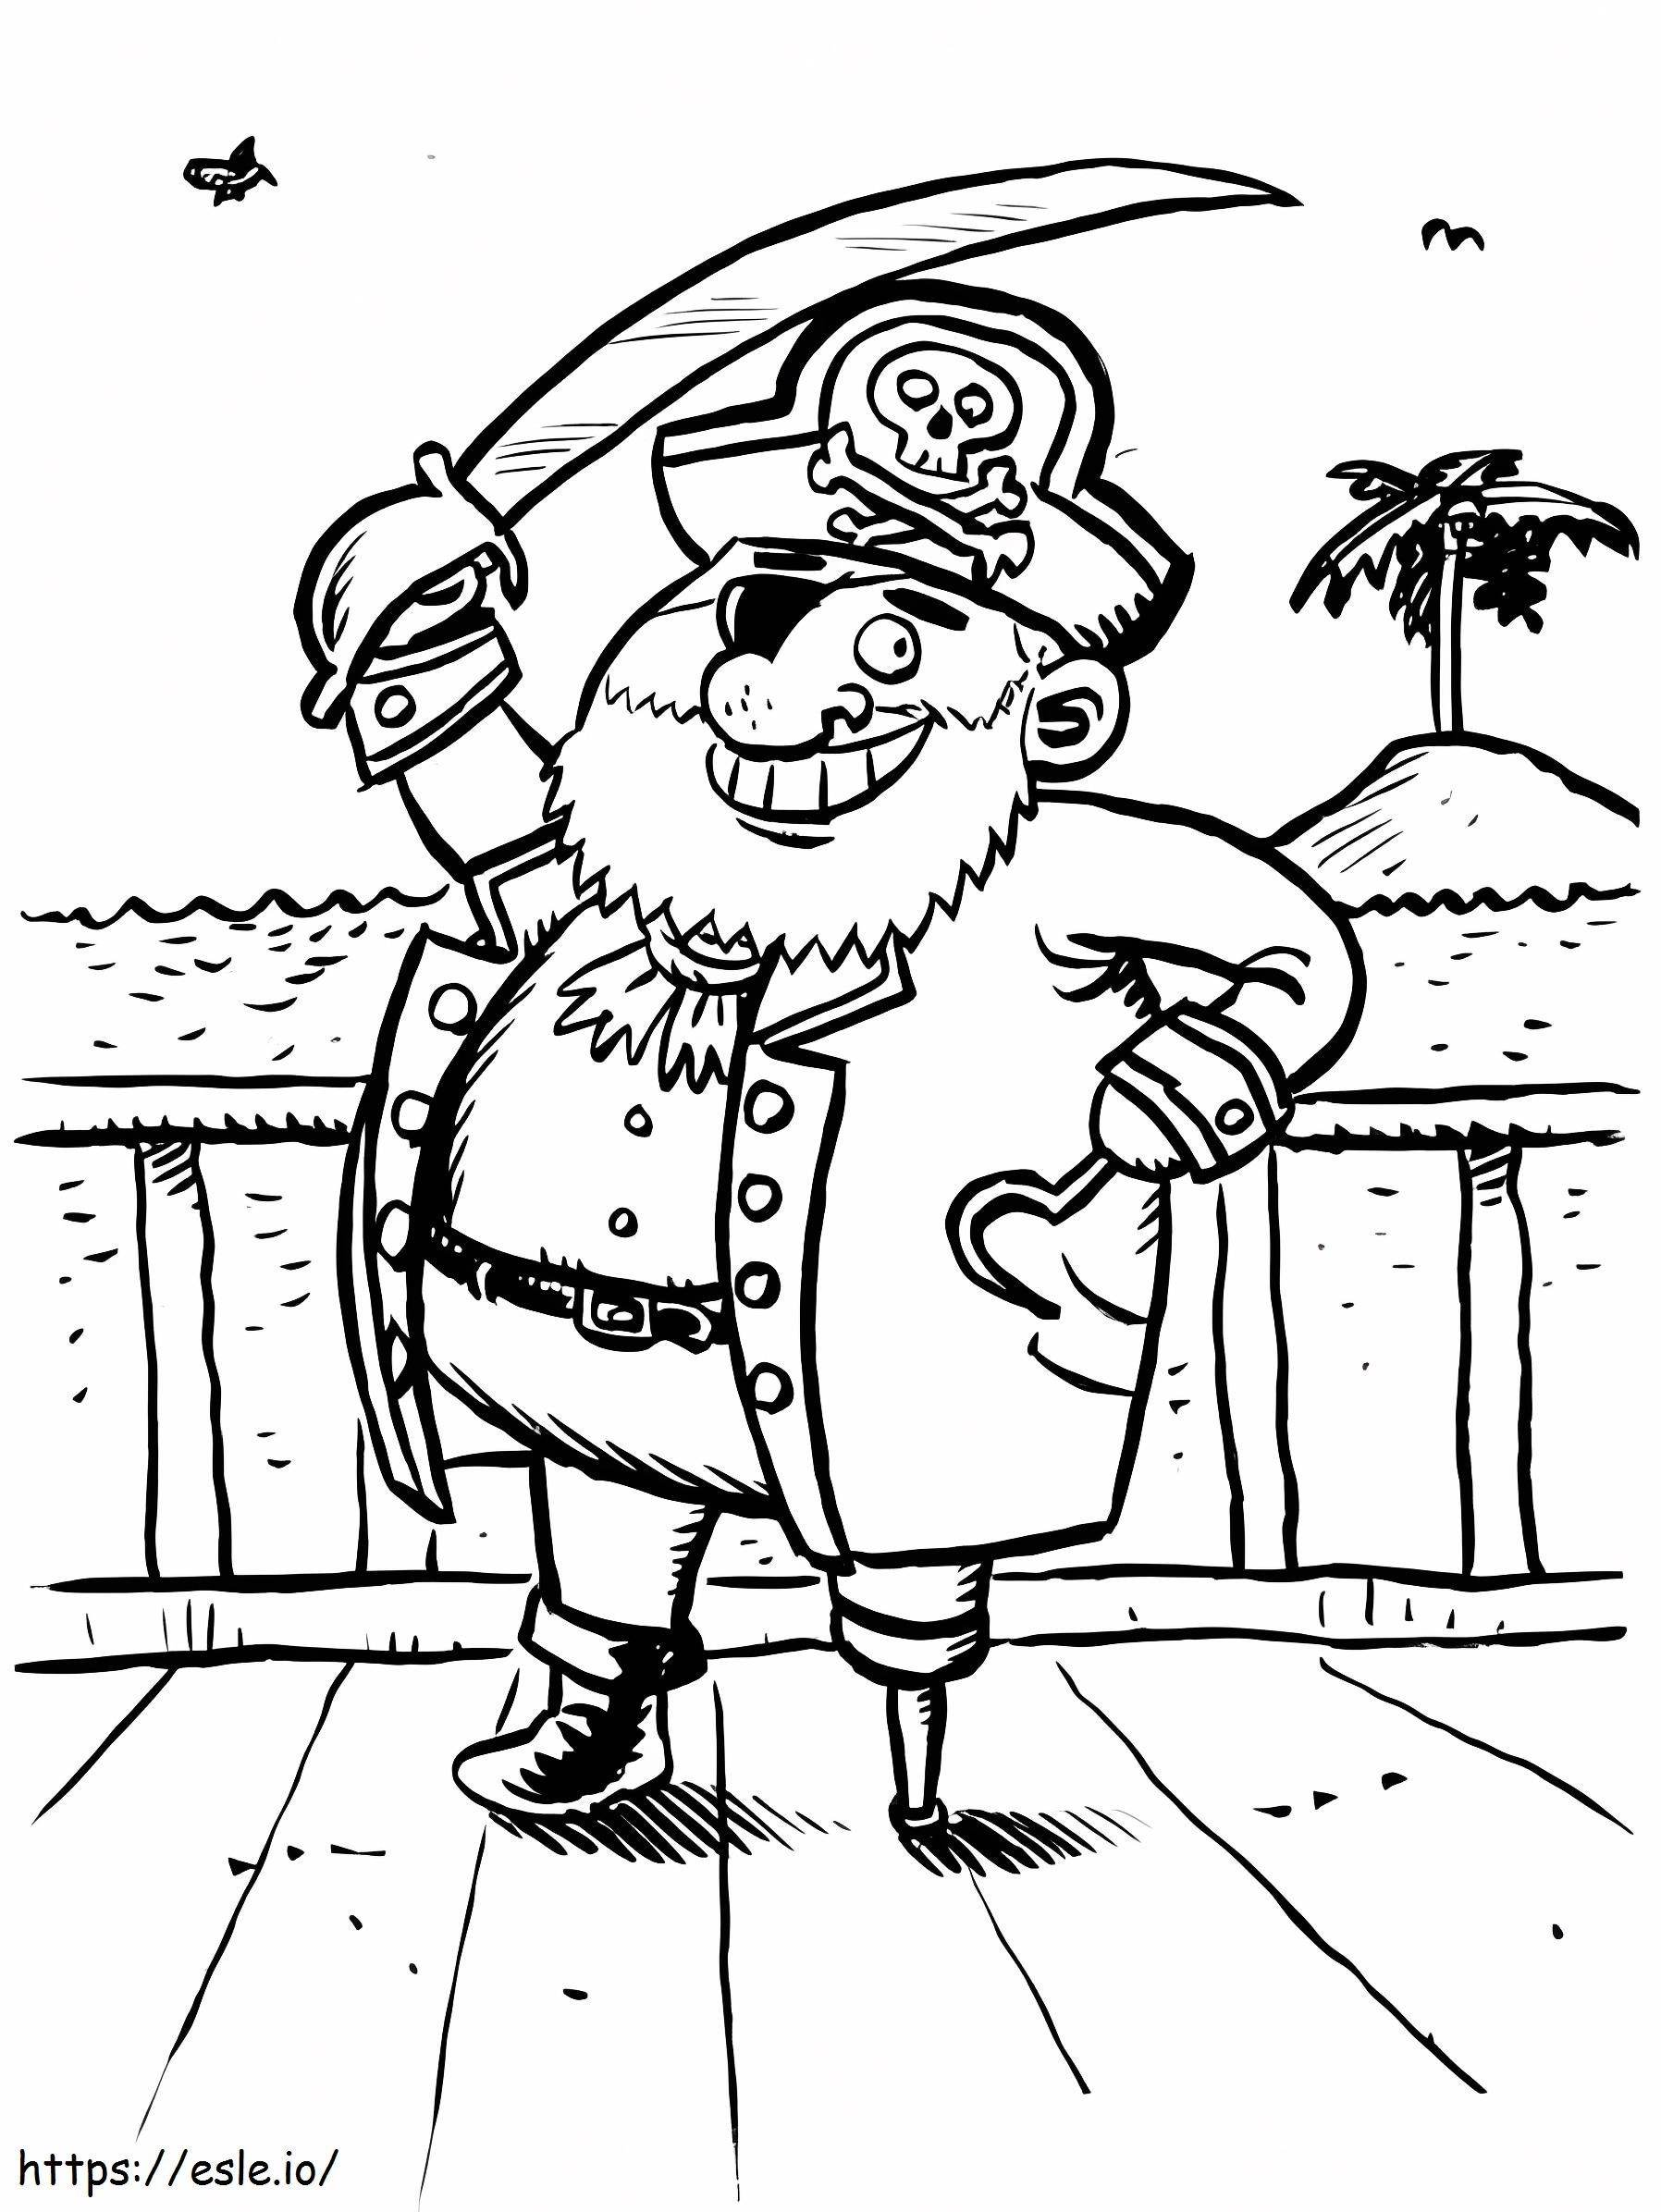 Pirate Captain coloring page